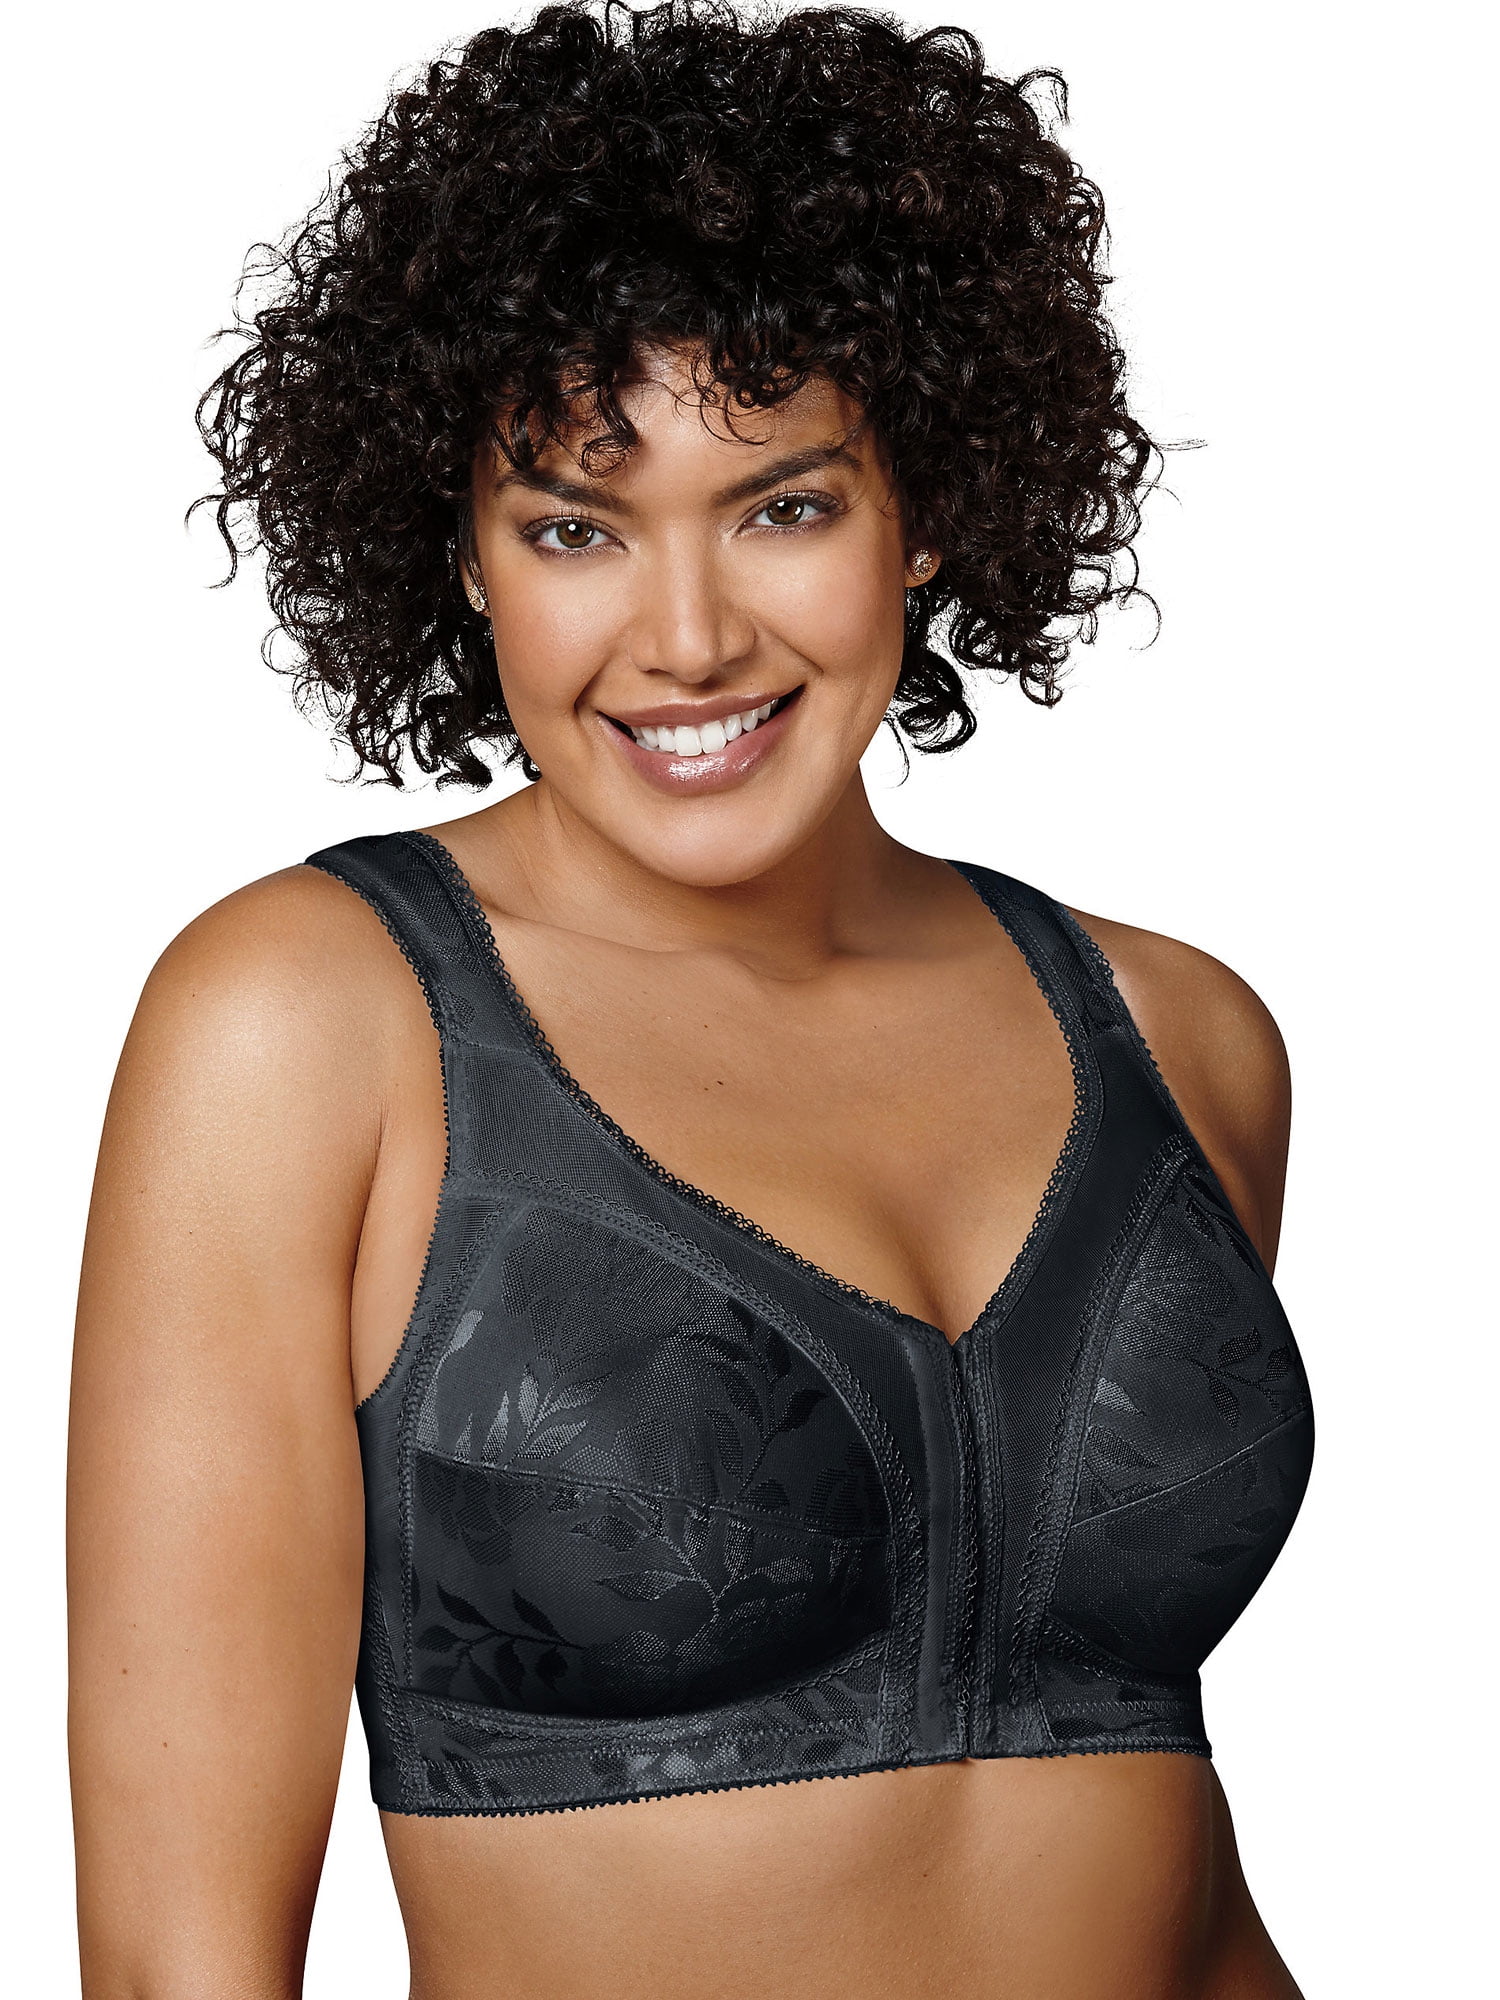 PLAYTEX 18 HOUR #4695 Black FRONT-CLOSE Wireless FULL COVERAGE